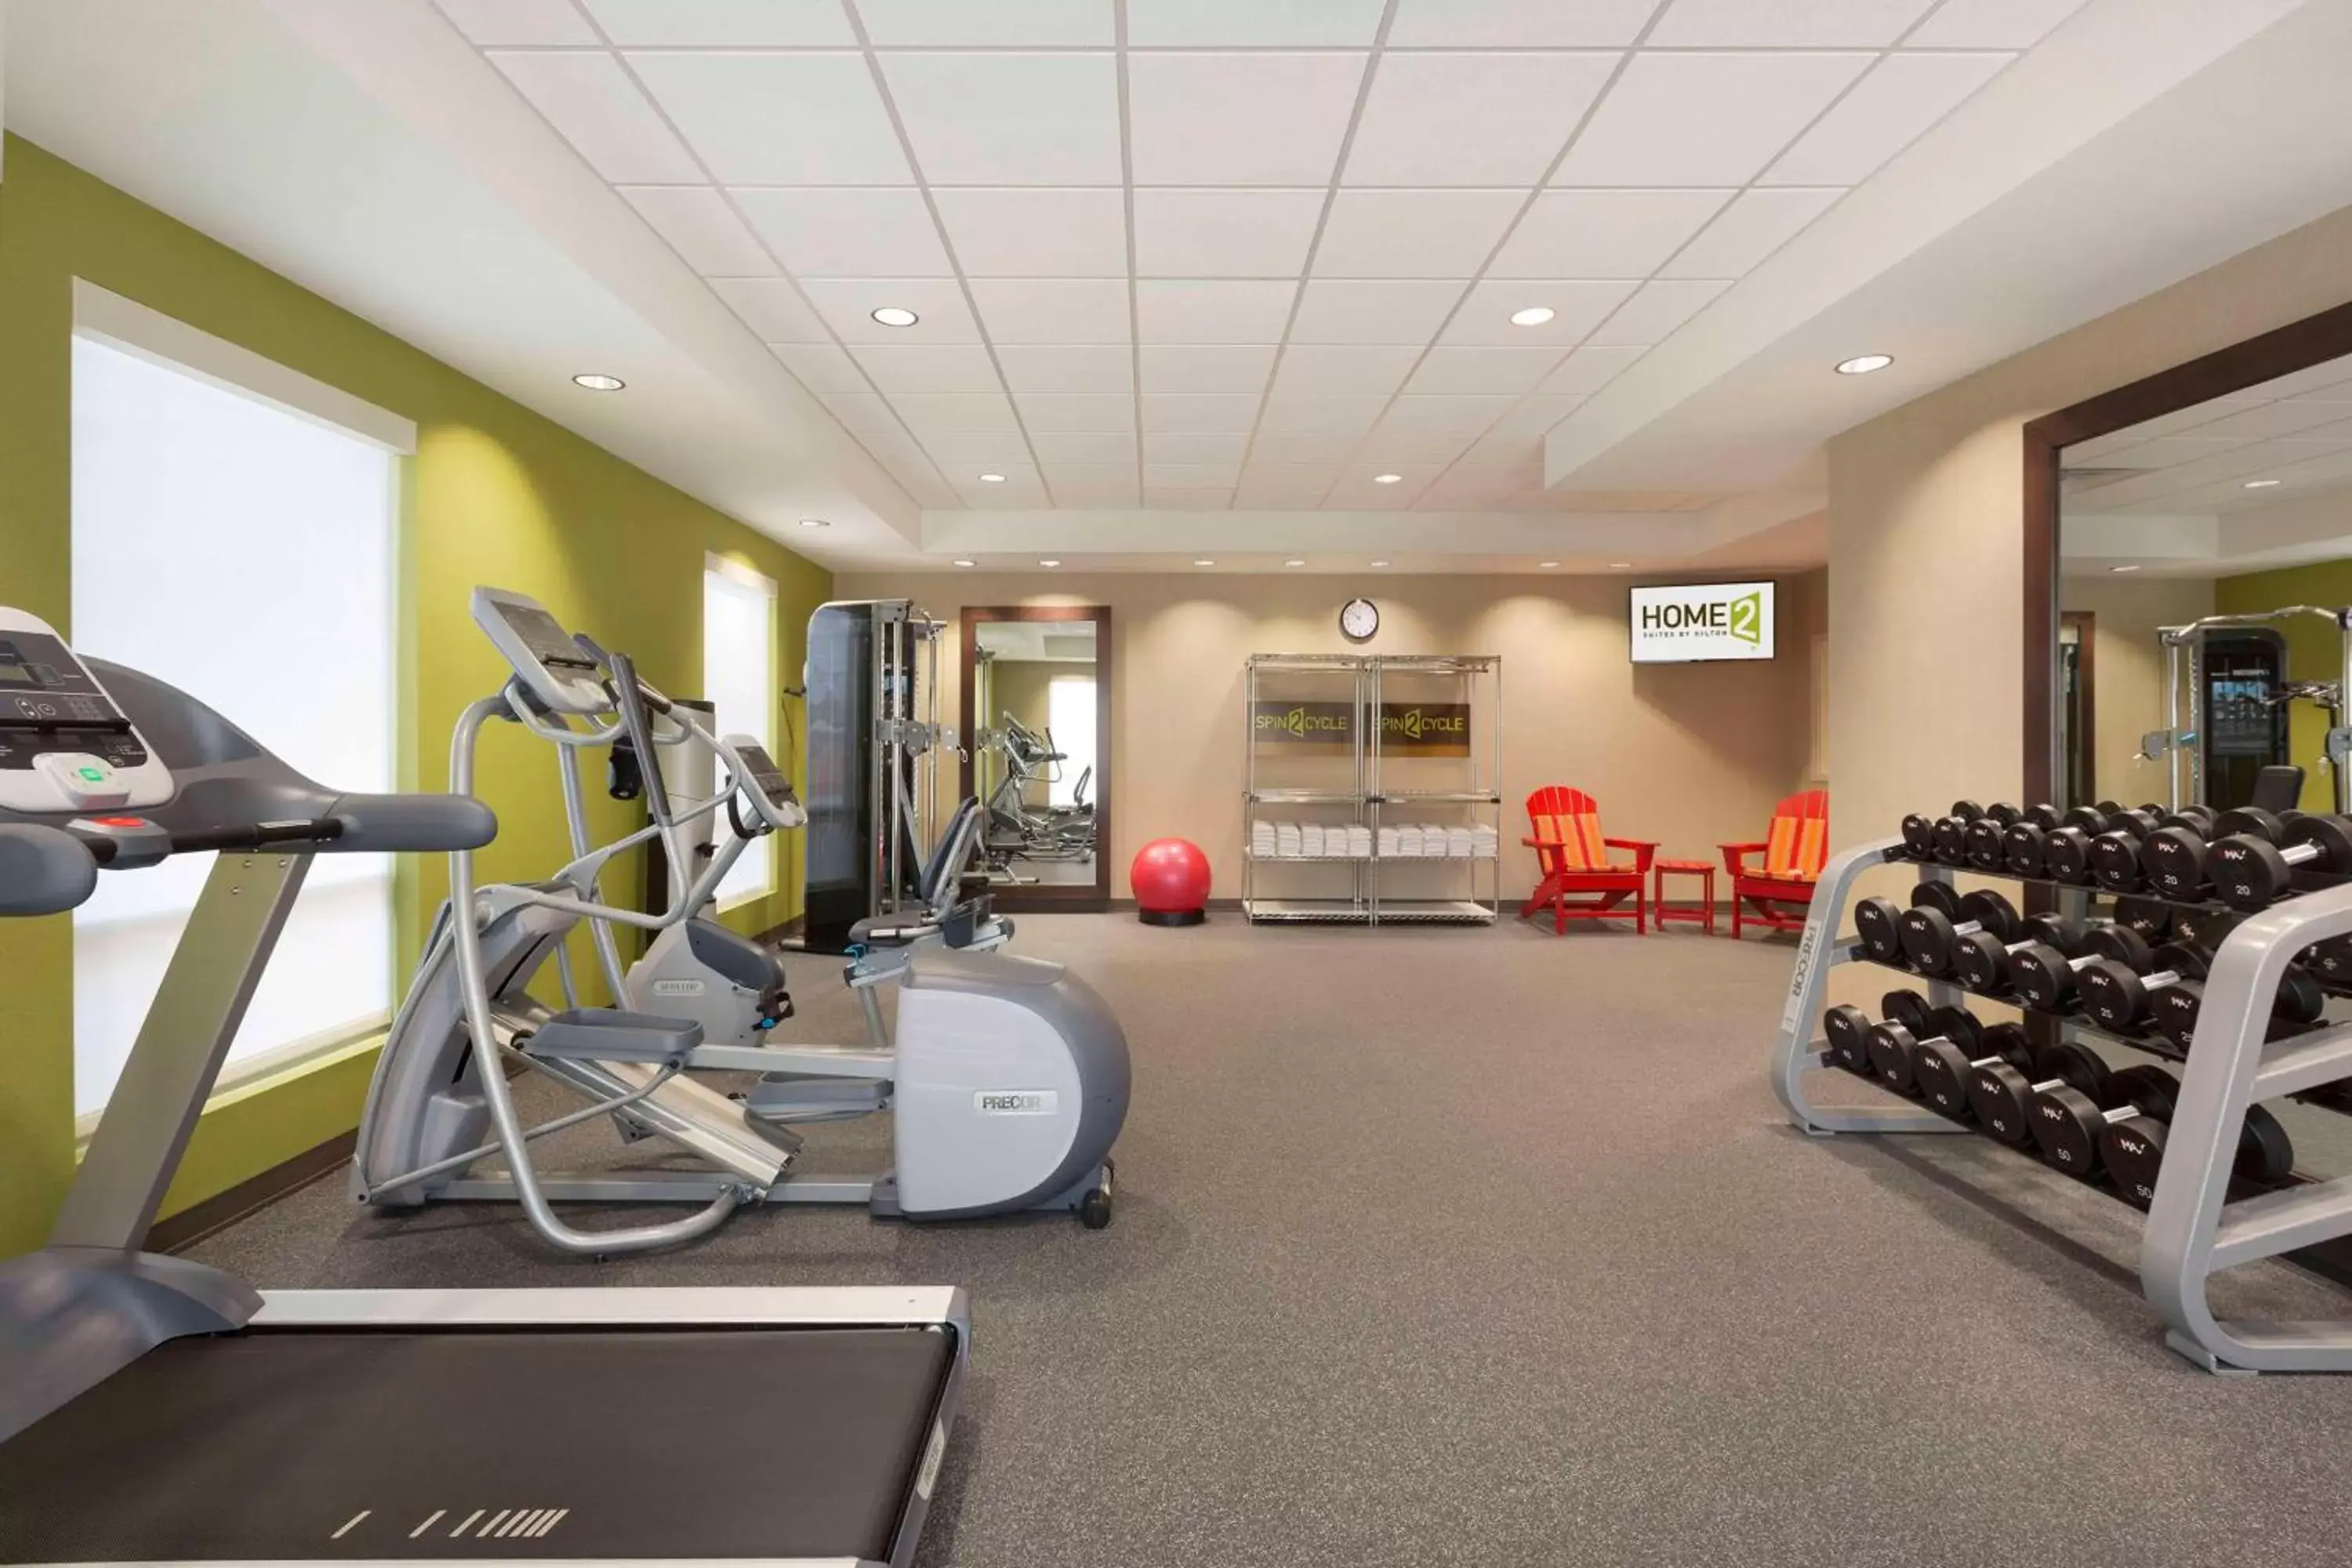 Fitness centre/facilities, Fitness Center/Facilities in Home2 Suites by Hilton Fort Smith